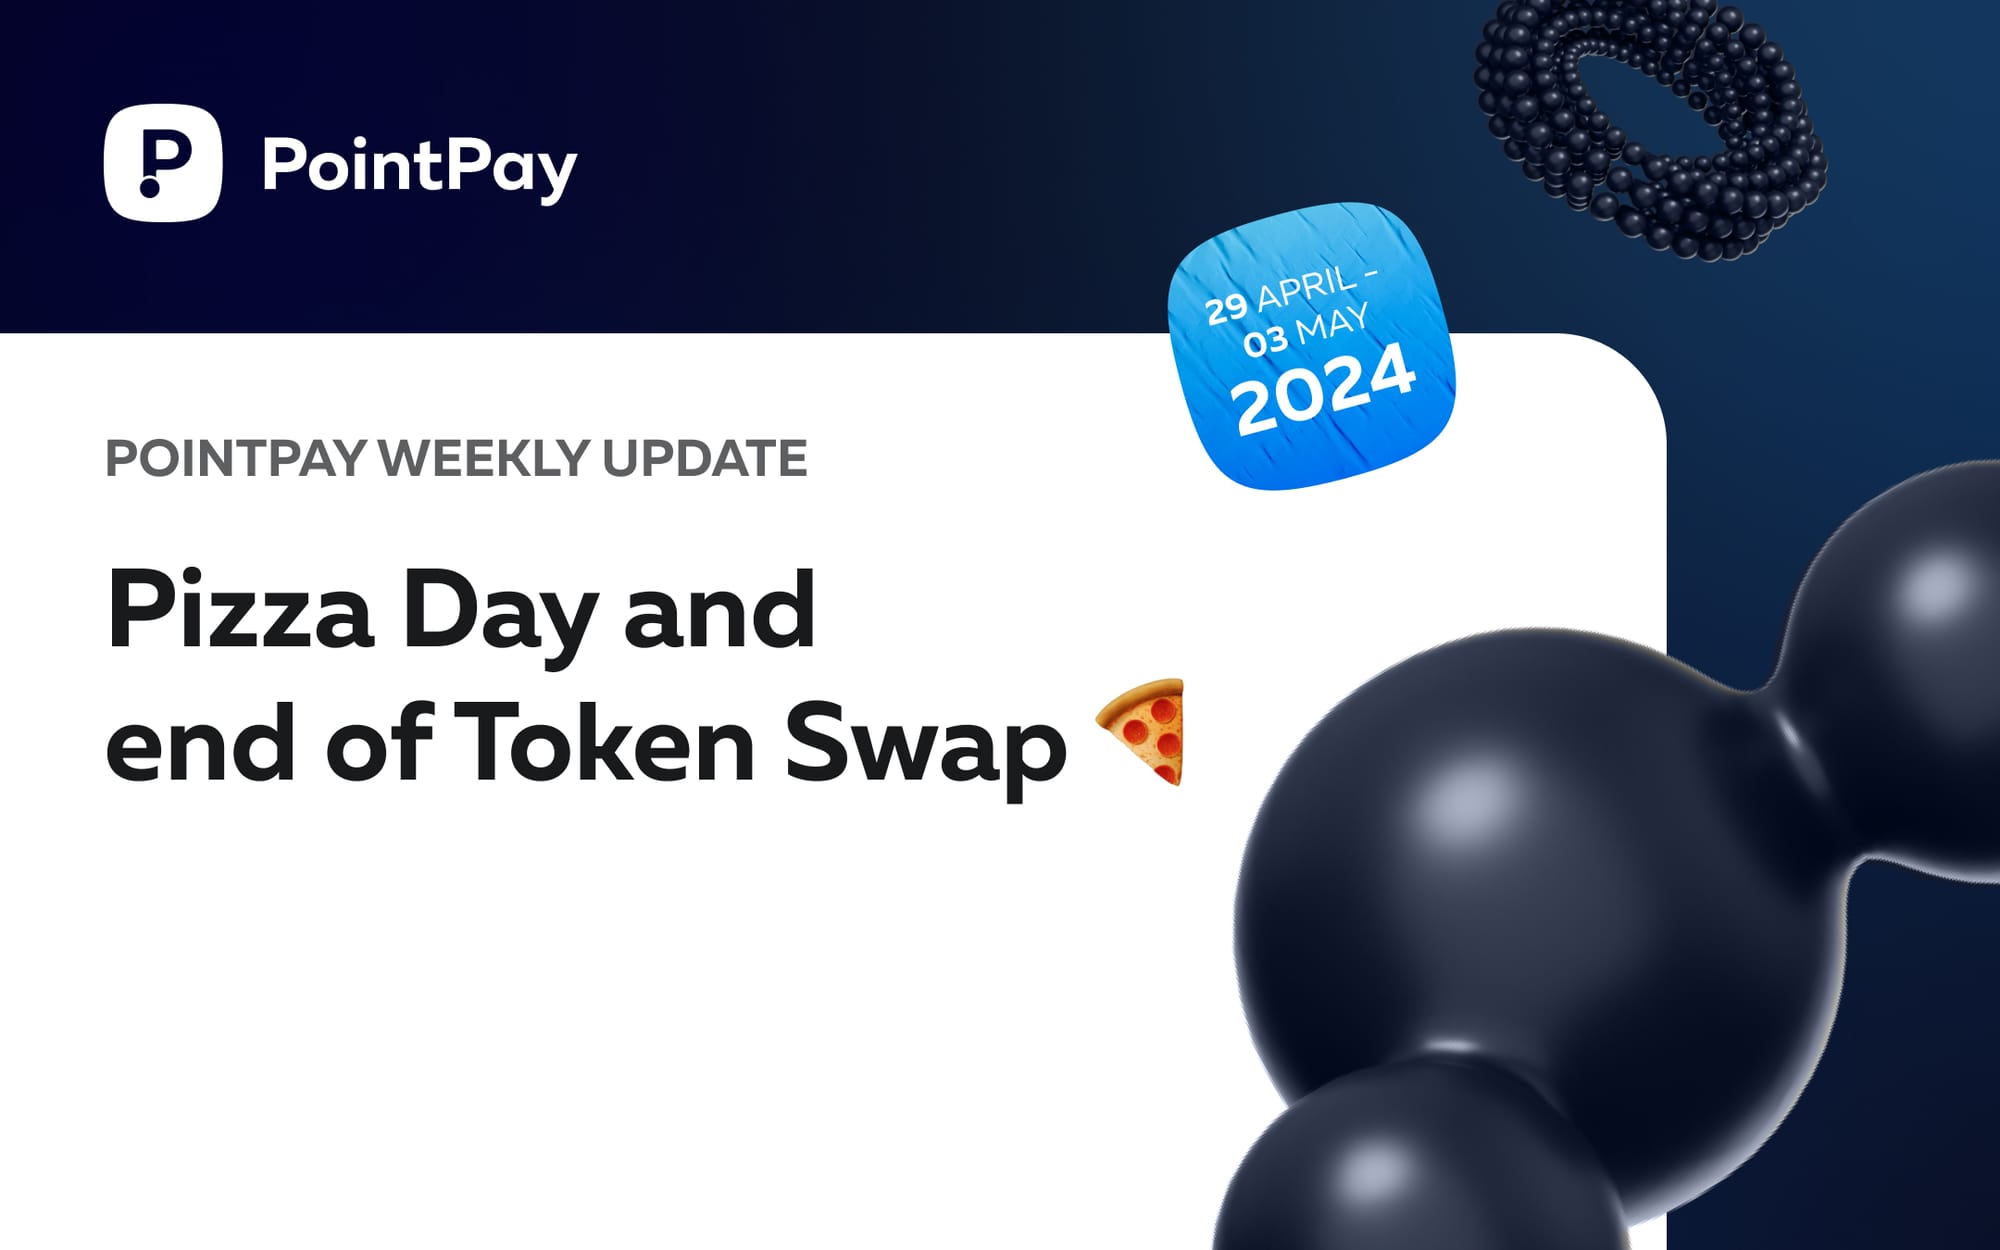 PointPay Weekly Update (29 April - 03 May)